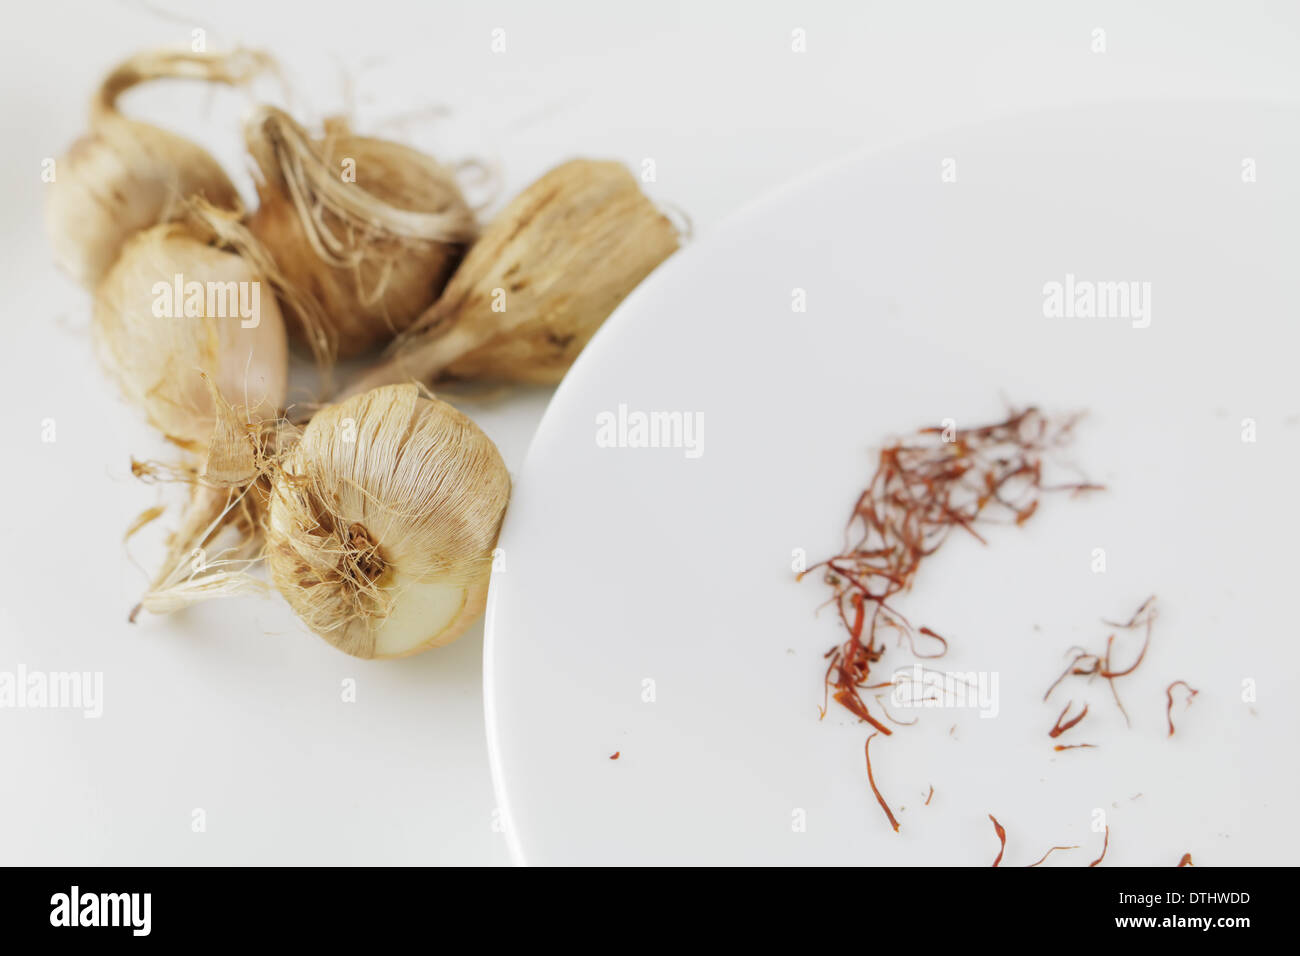 Saffron Corms with Spice on a plate Stock Photo